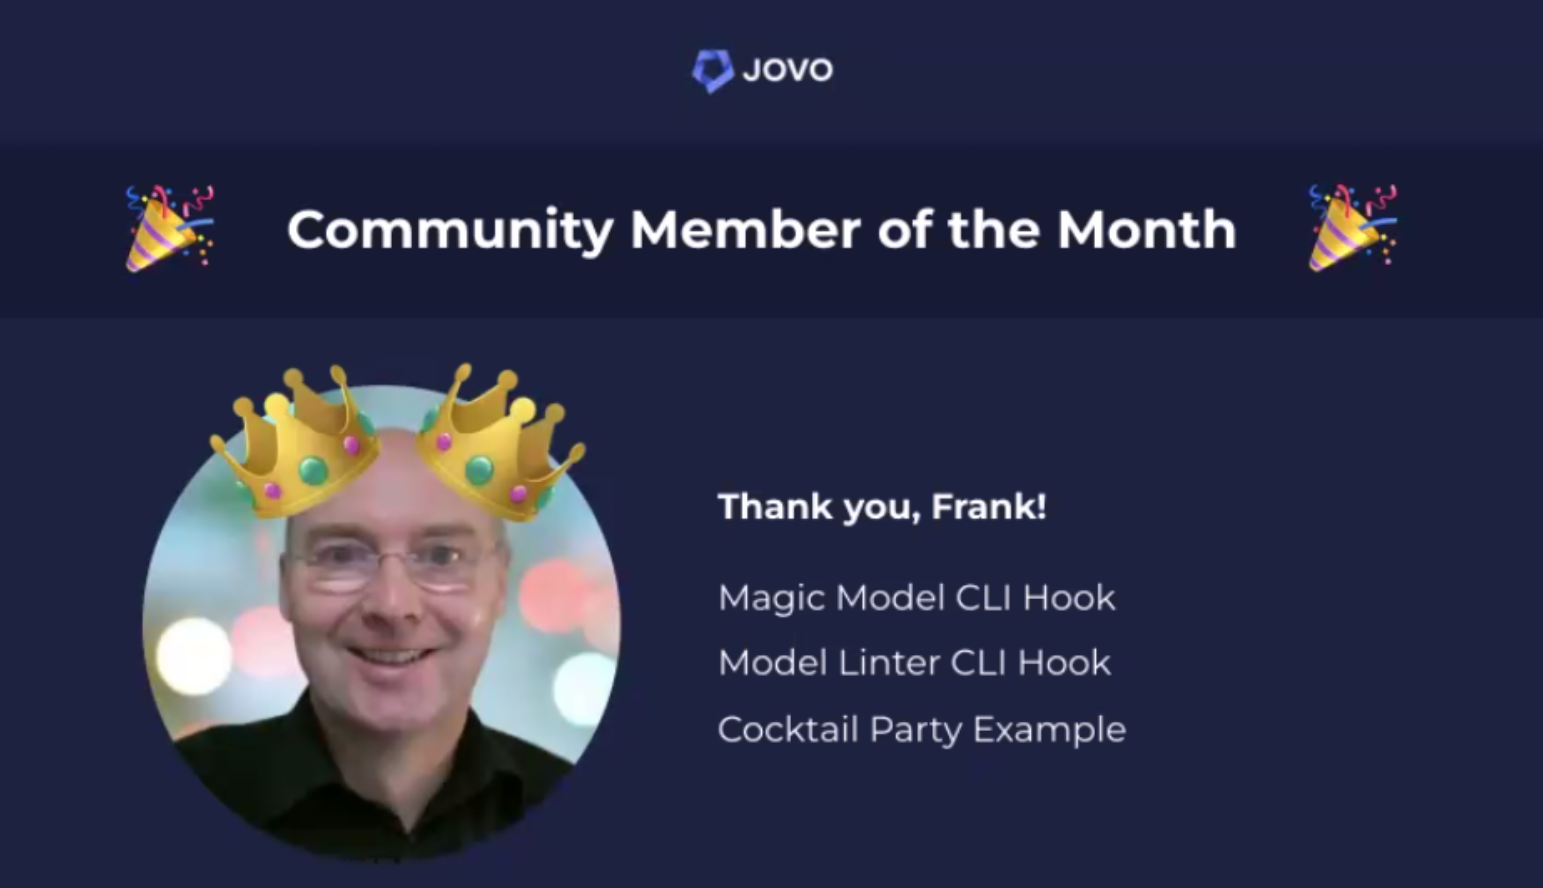 Jovo Community Member of the month